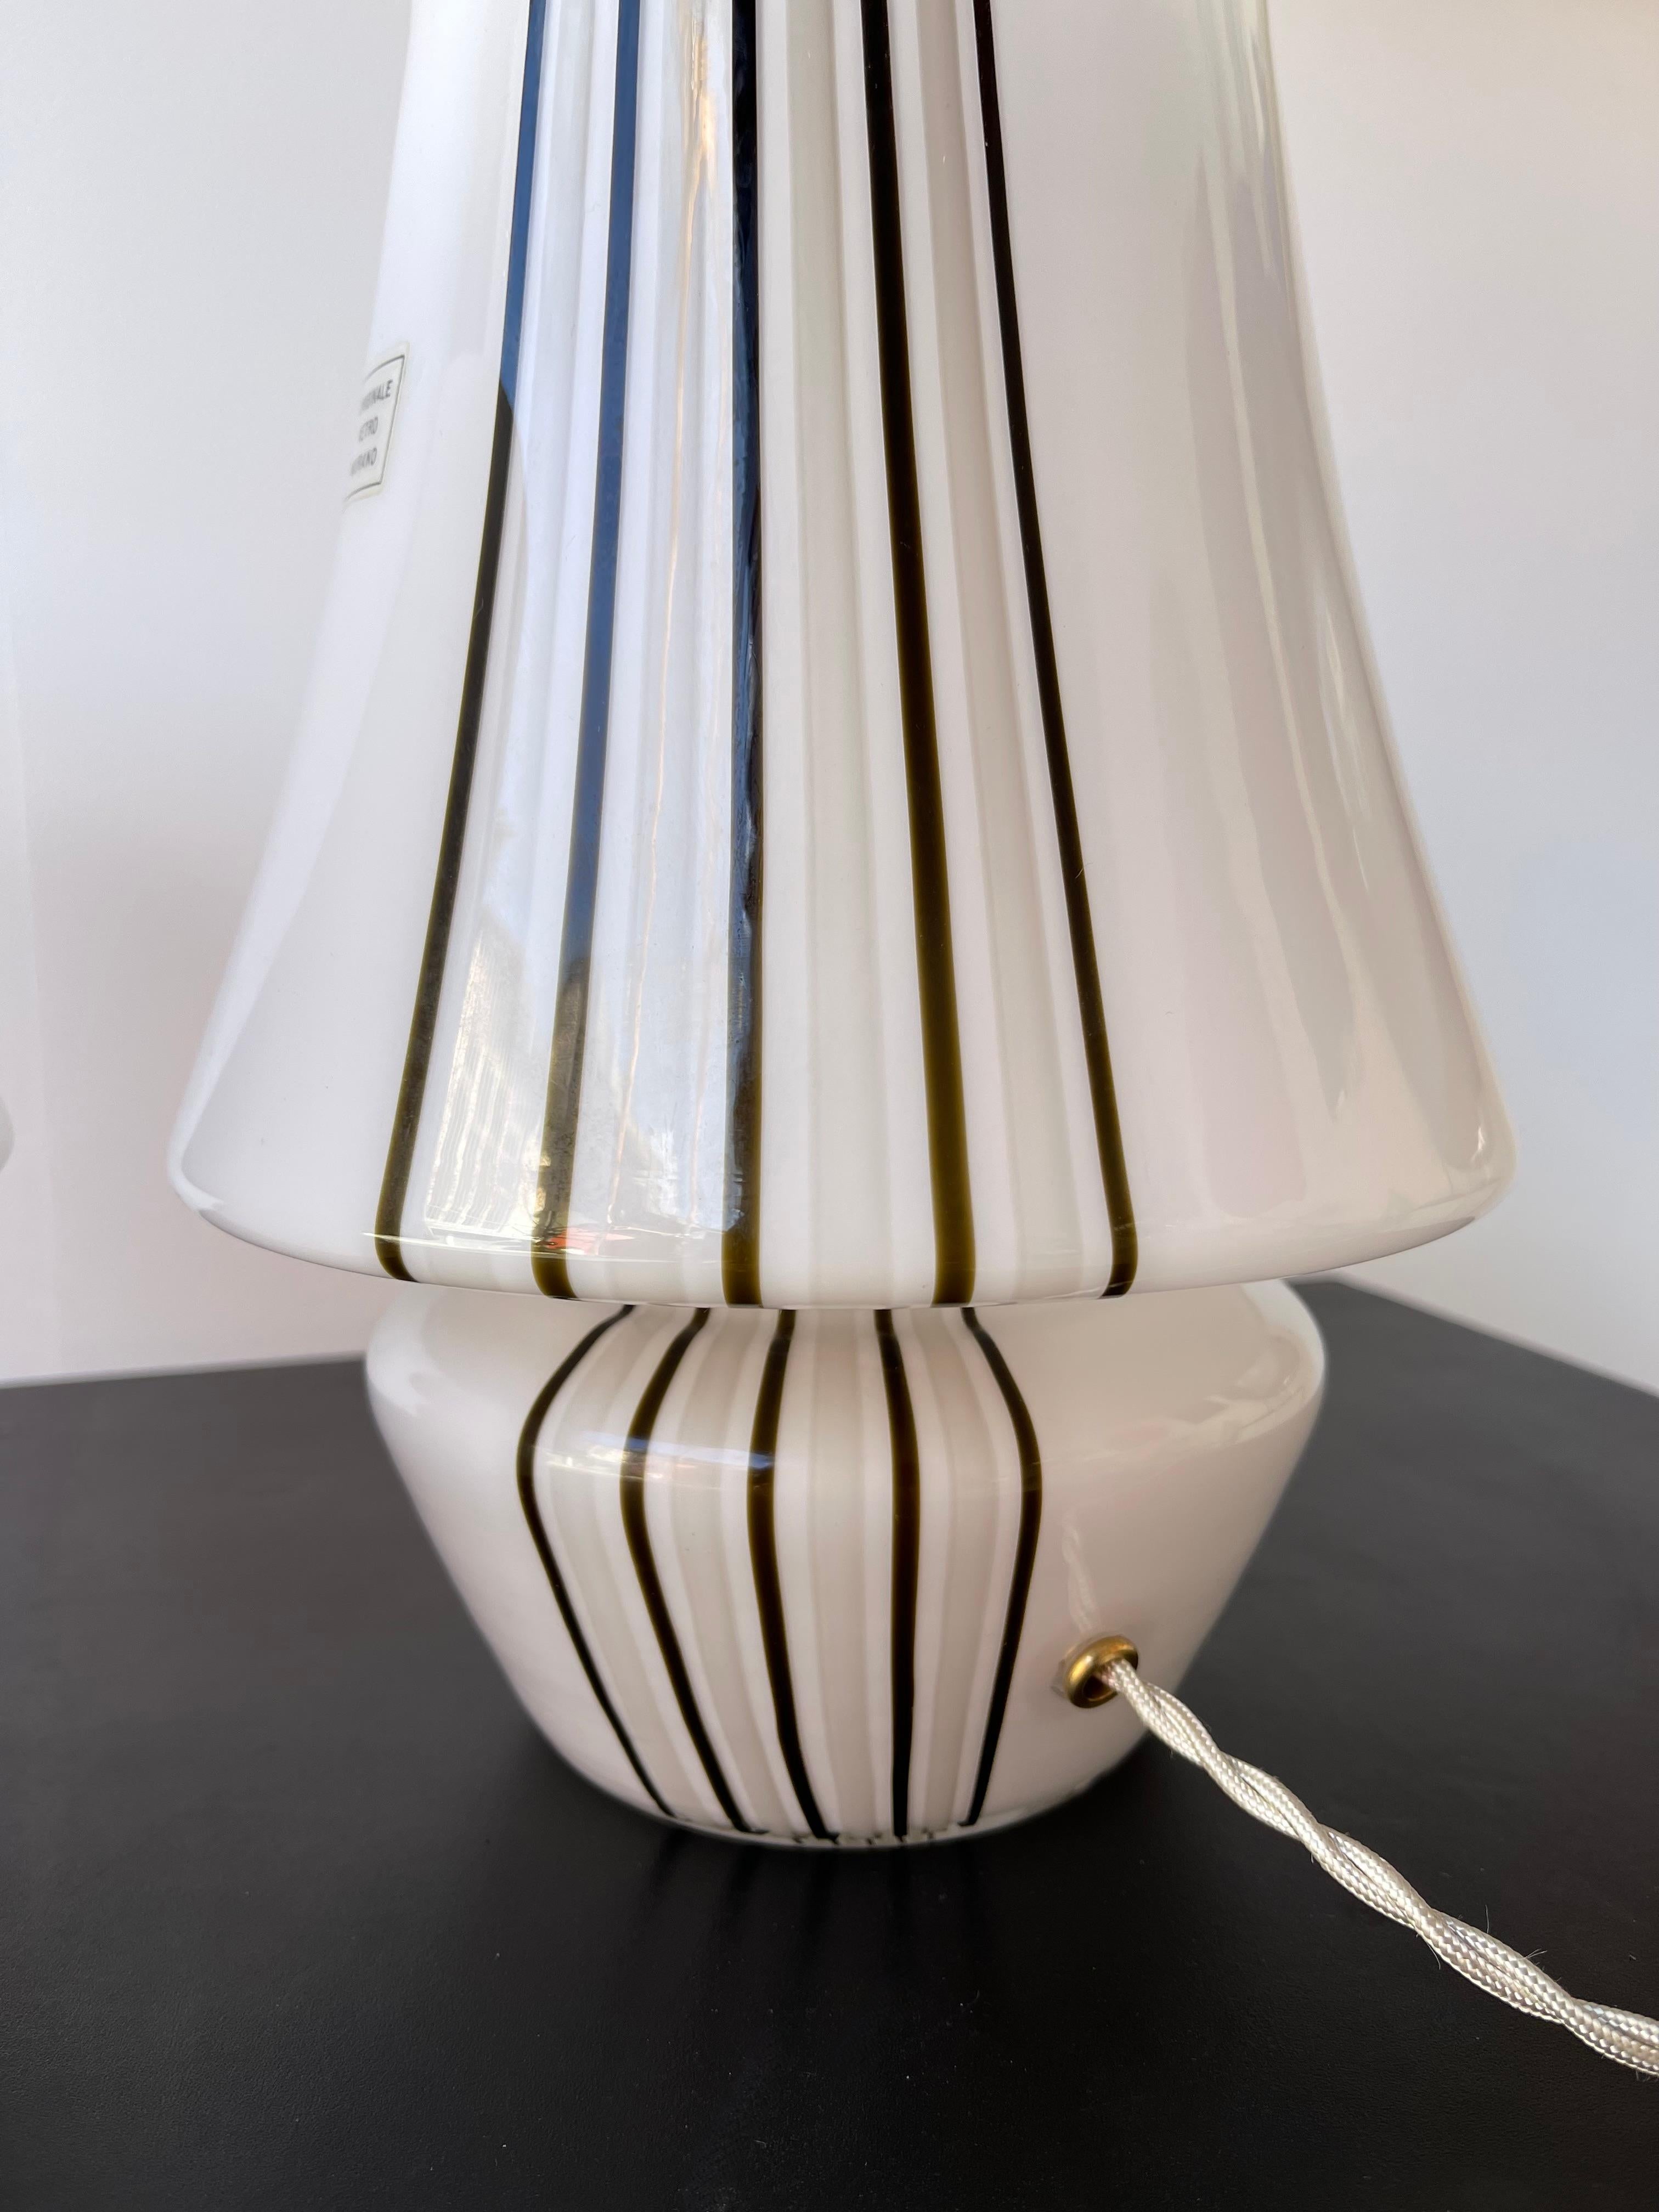 Pair of Stripe Murano Glass Lamps, Italy, 1970s For Sale 4